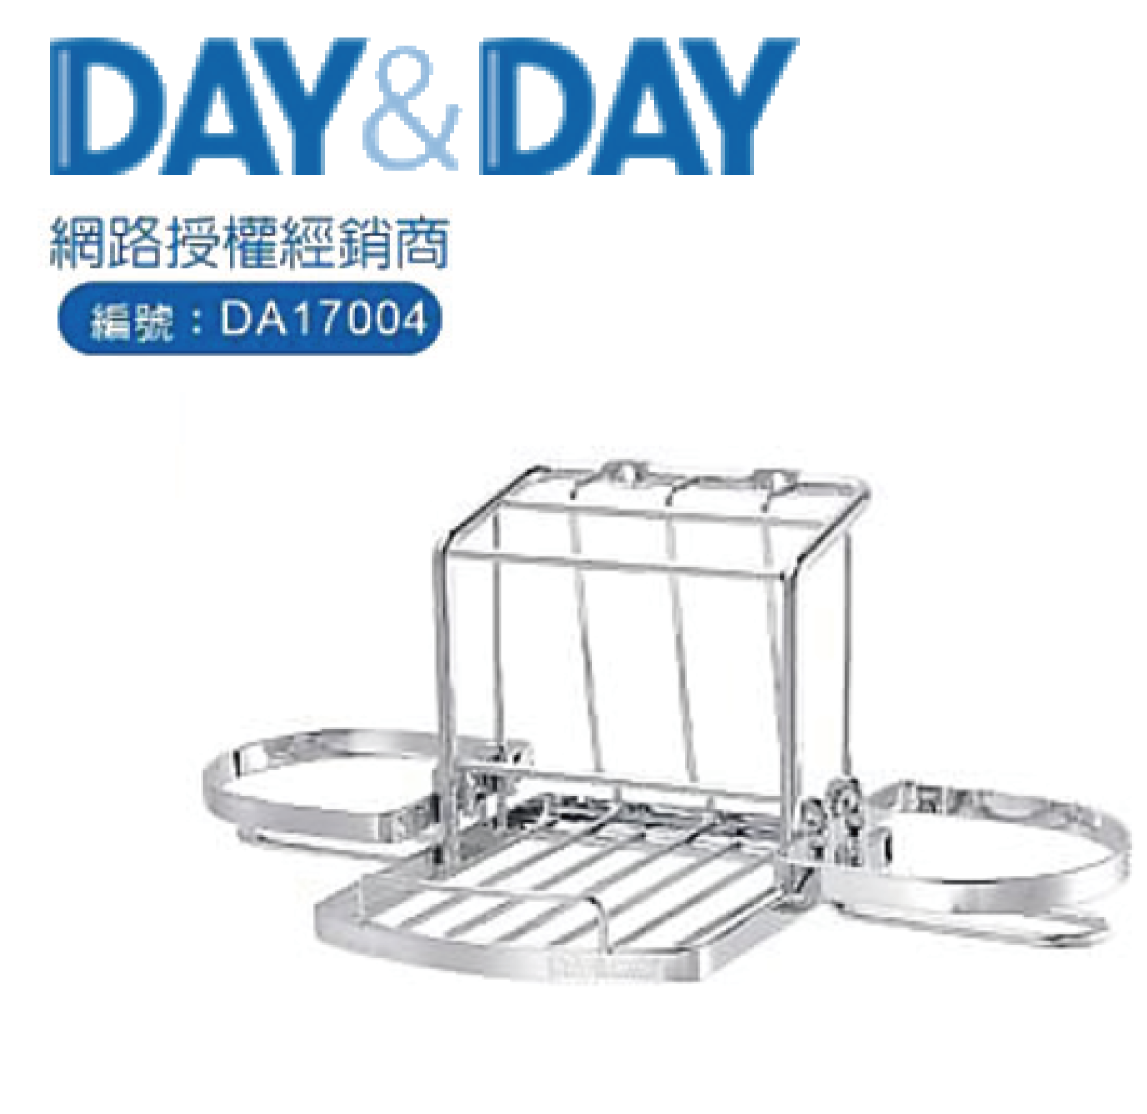 <br/><br/>  DAY&DAY多功能盥洗架(ST6632A)<br/><br/>